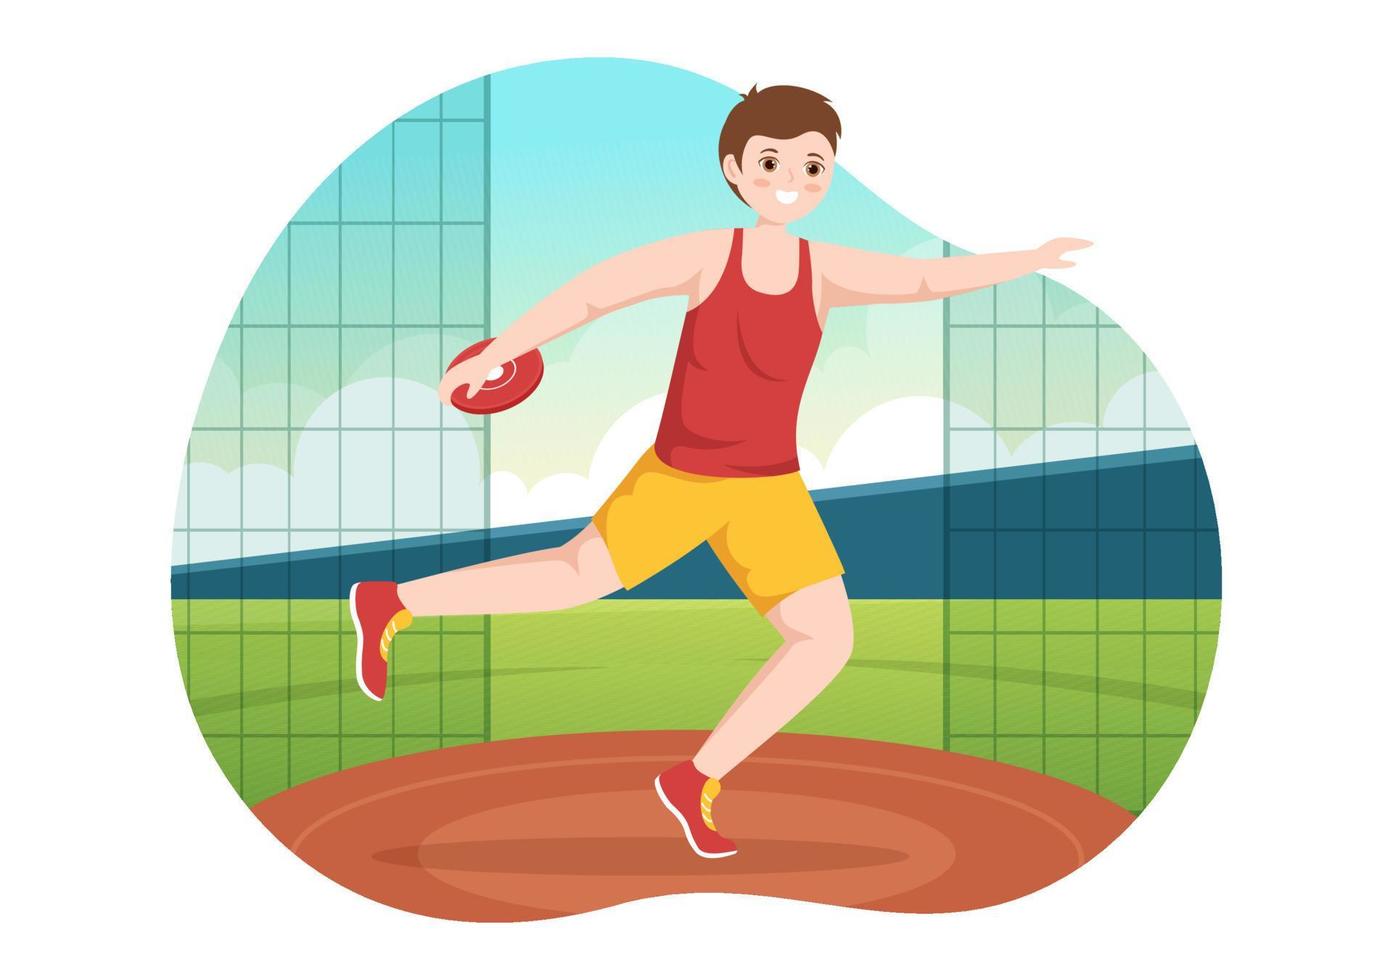 Discus Throw Playing Athletics Illustration with Throwing a Wooden Plate in Sports Championship Flat Cartoon Hand Drawn Templates vector